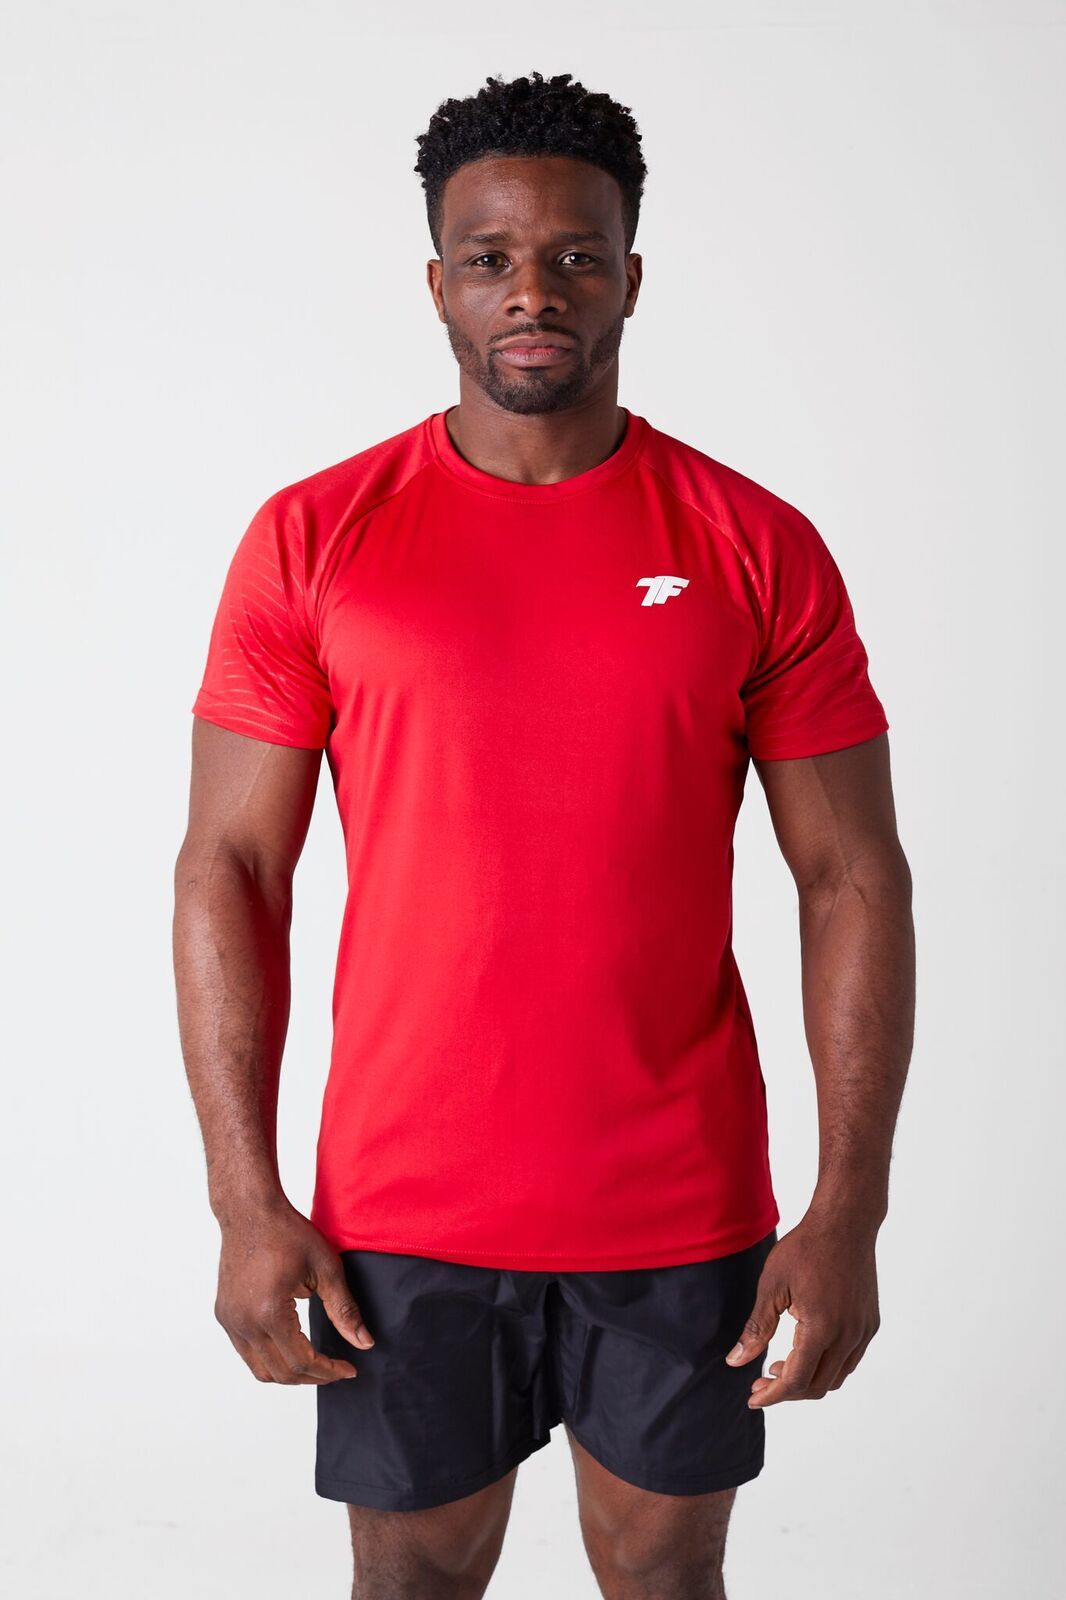 A man wearing True Form's Black Shorts and Red T-Shirt for Gym